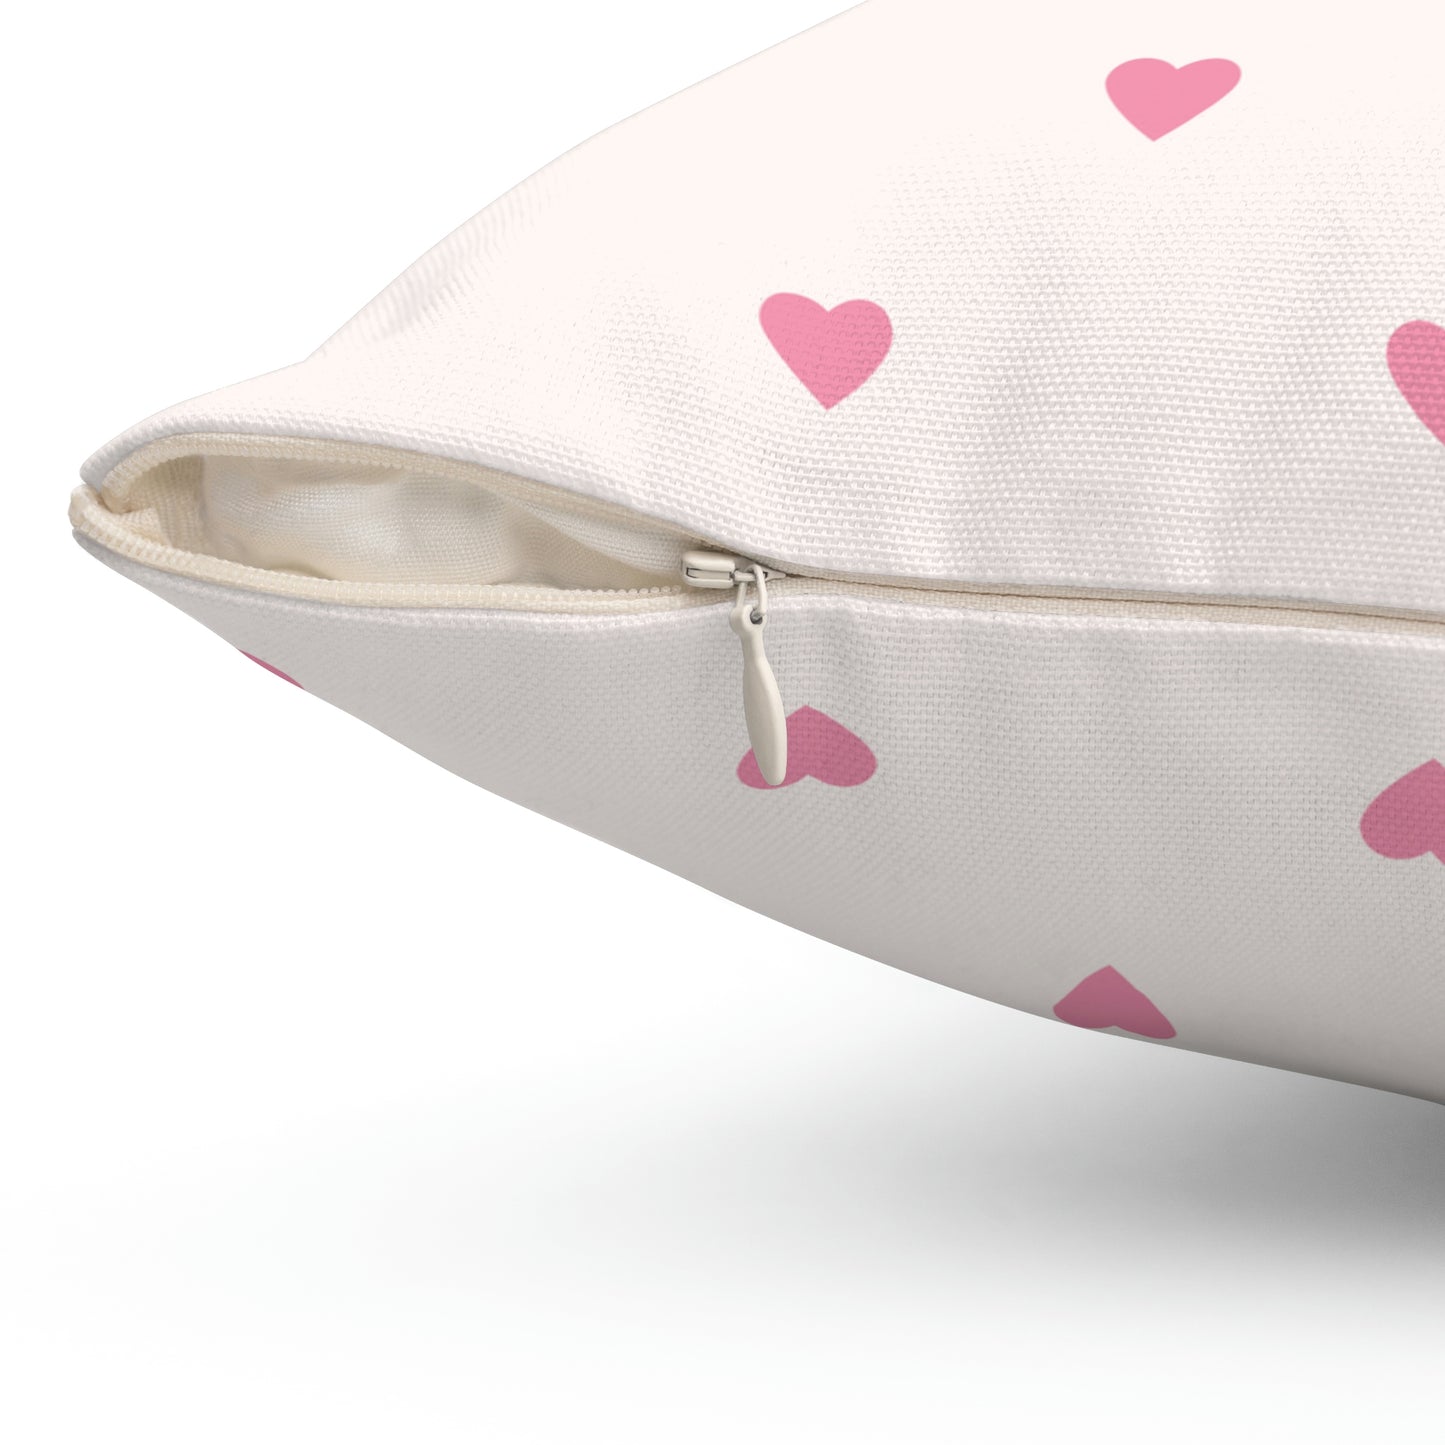 Tiny Hearts Square Pillow Cover